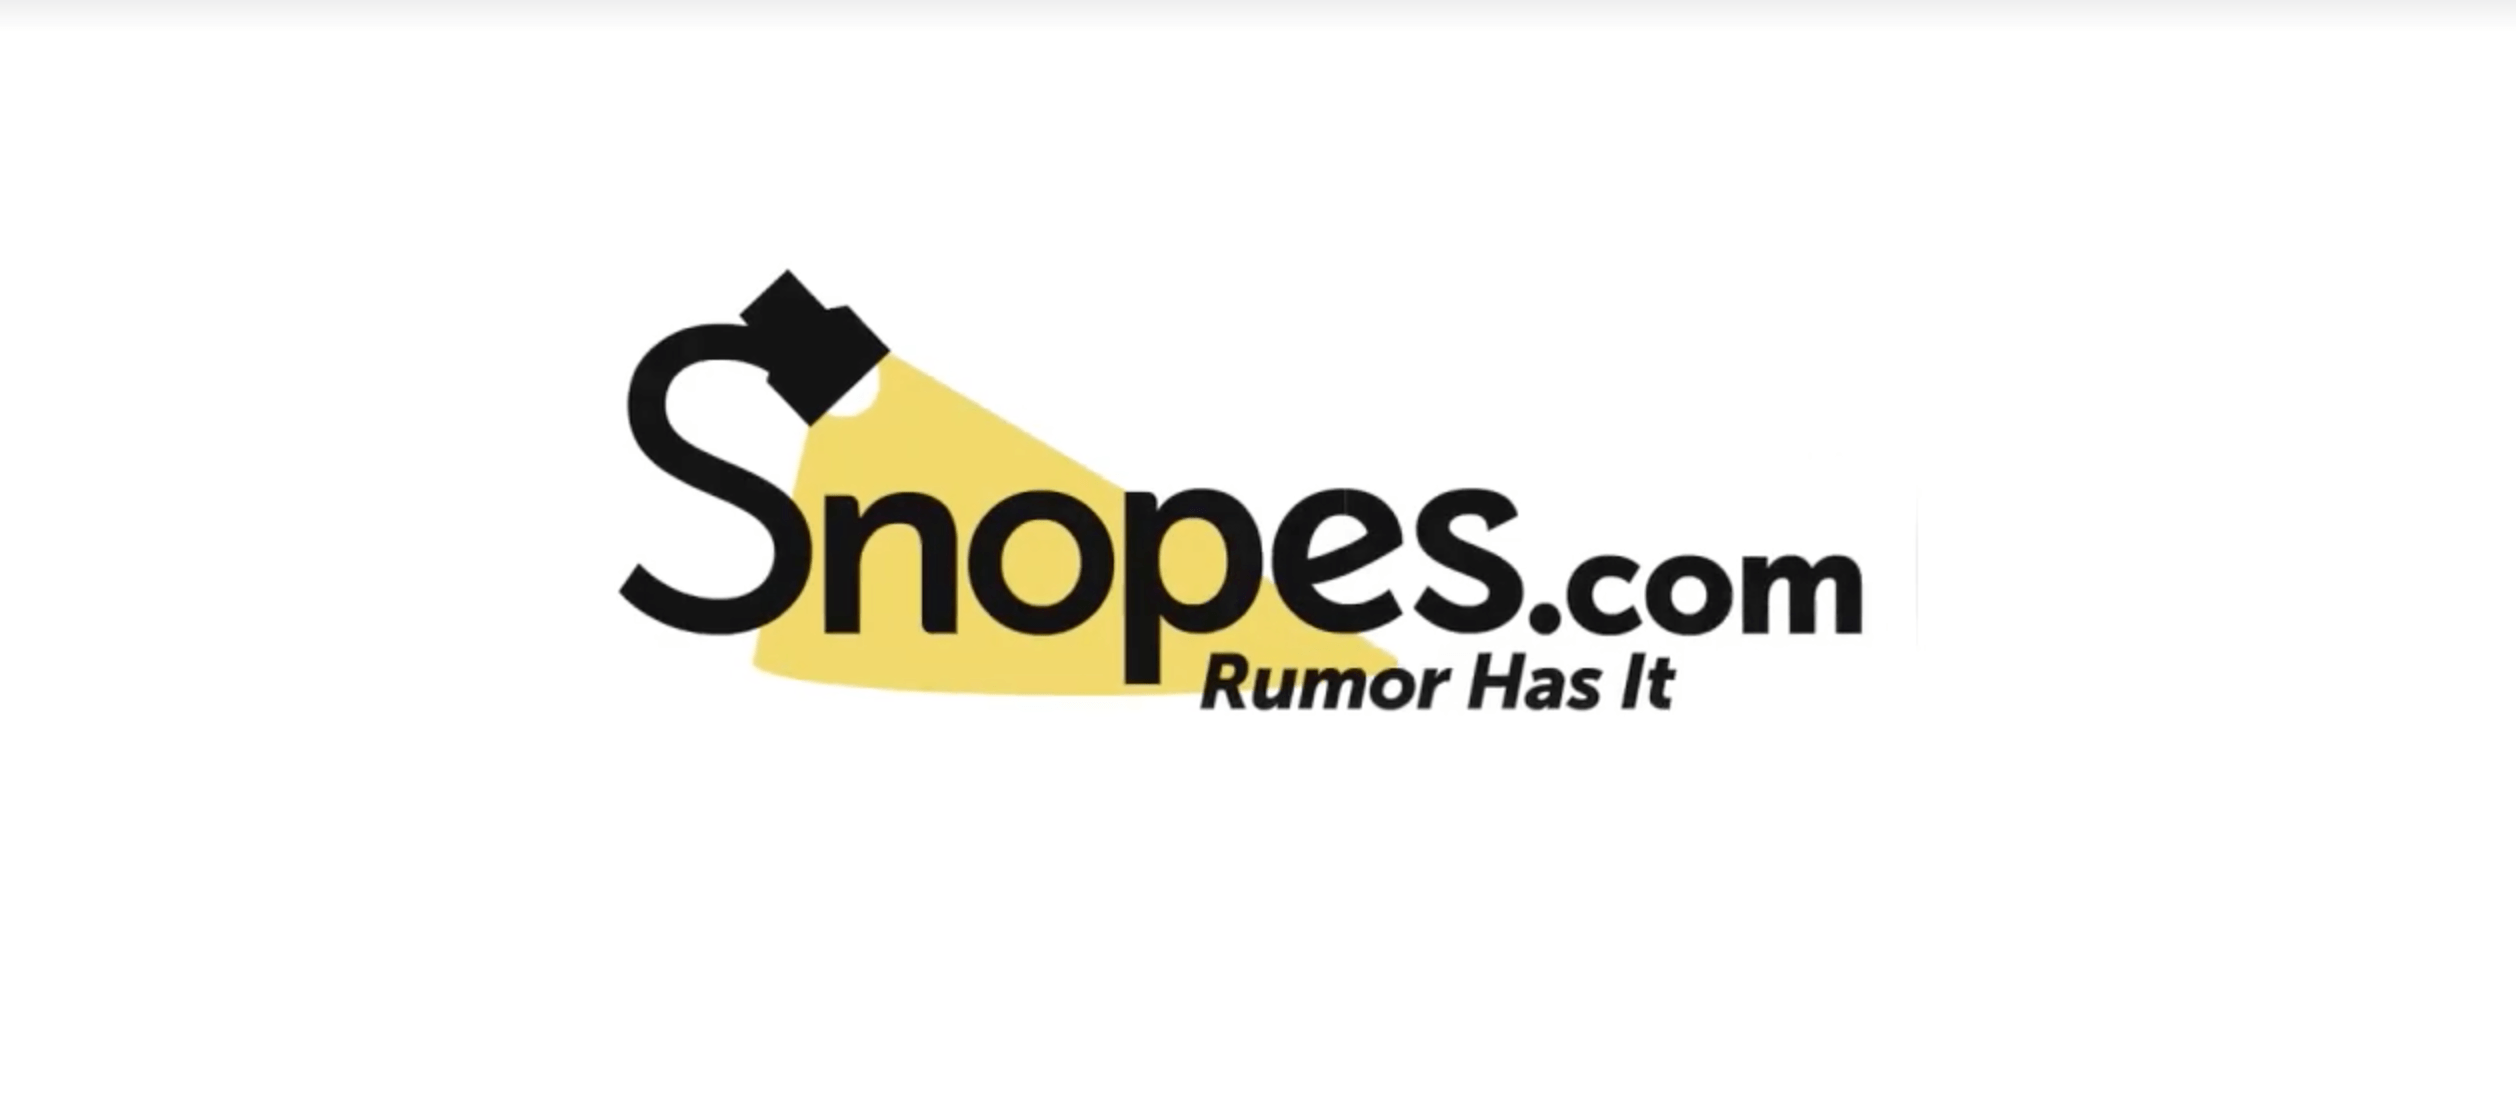 Snopes.com Logo - Snopes pulls out of its fact-checking partnership with Facebook ...